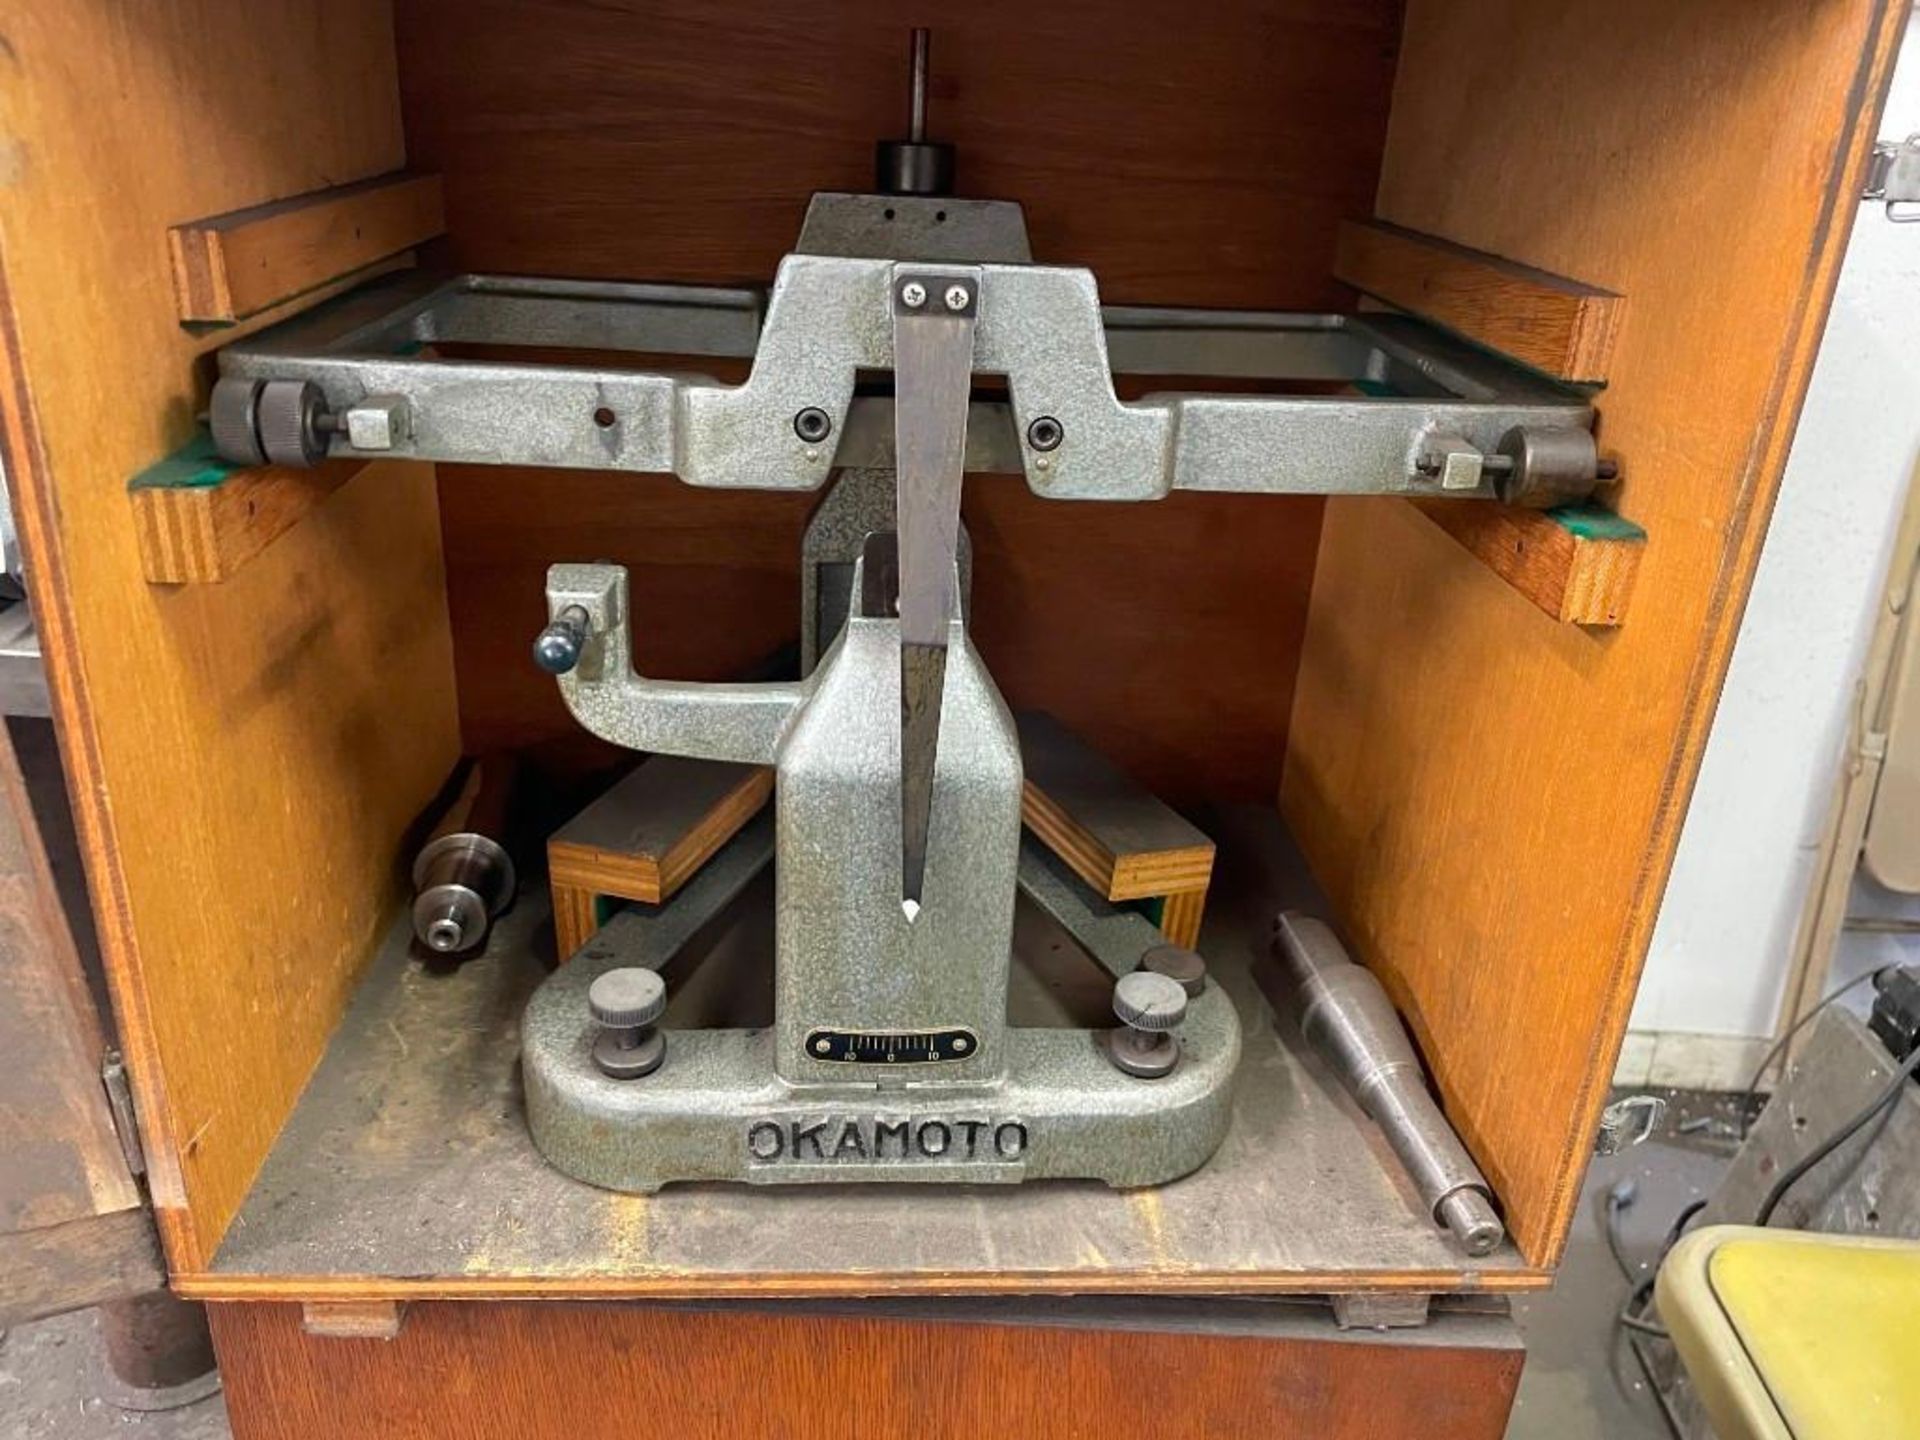 OKAMOTO ACCUGAR 12"X24" 124N SURFACE GRINDER WITH MAGNETIC CHUCK - Image 7 of 8